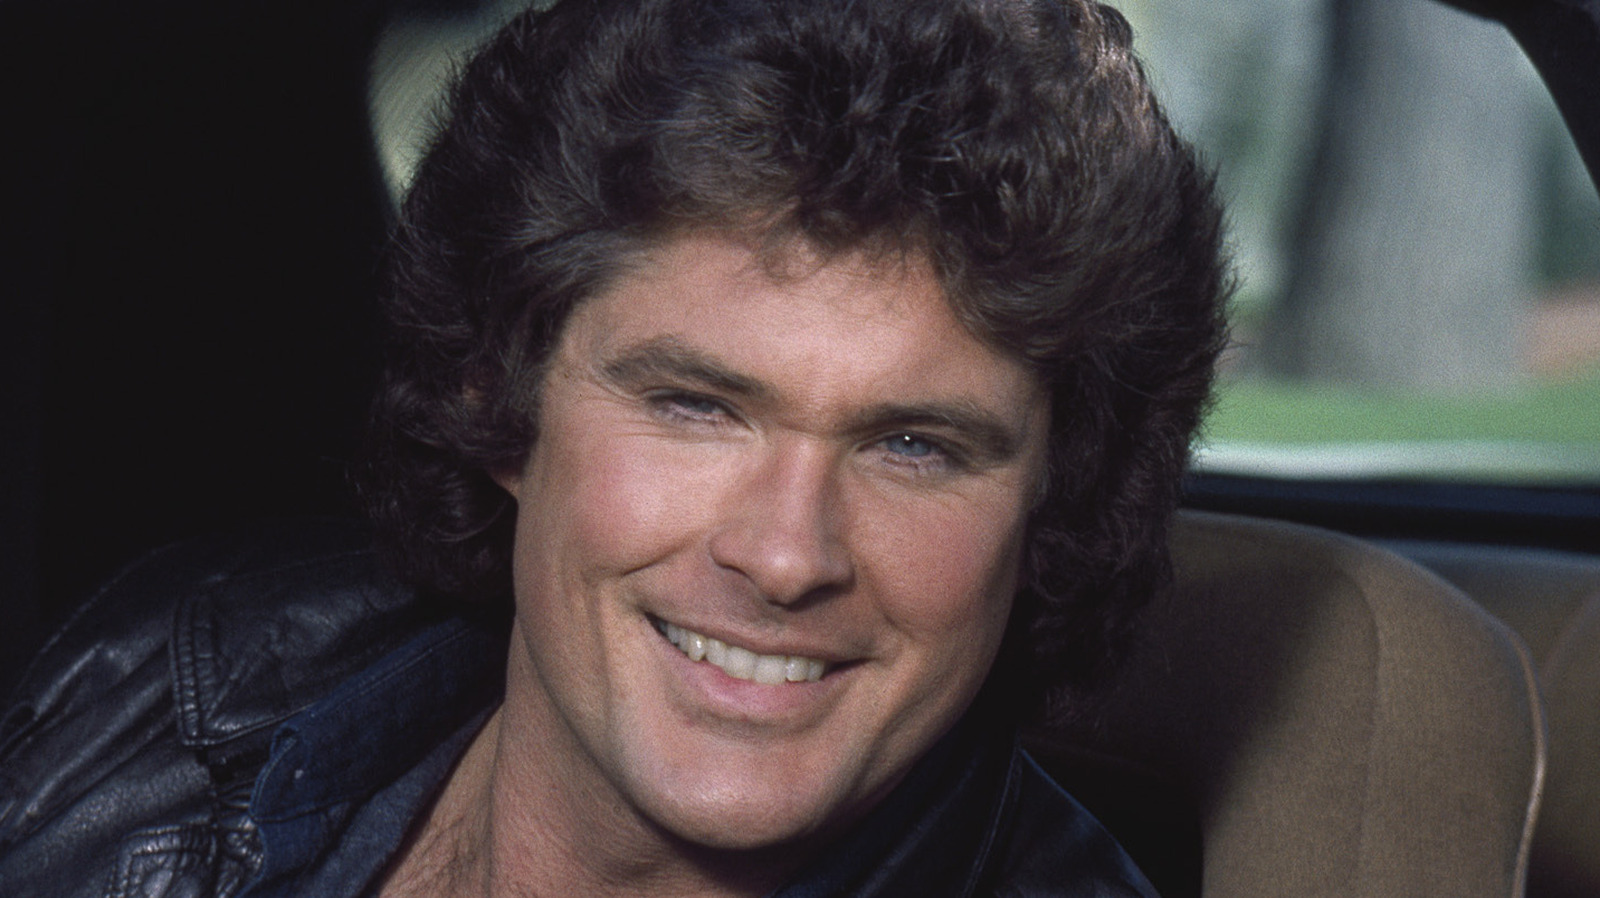 One Man Can Make A Difference: A History of Knight Rider